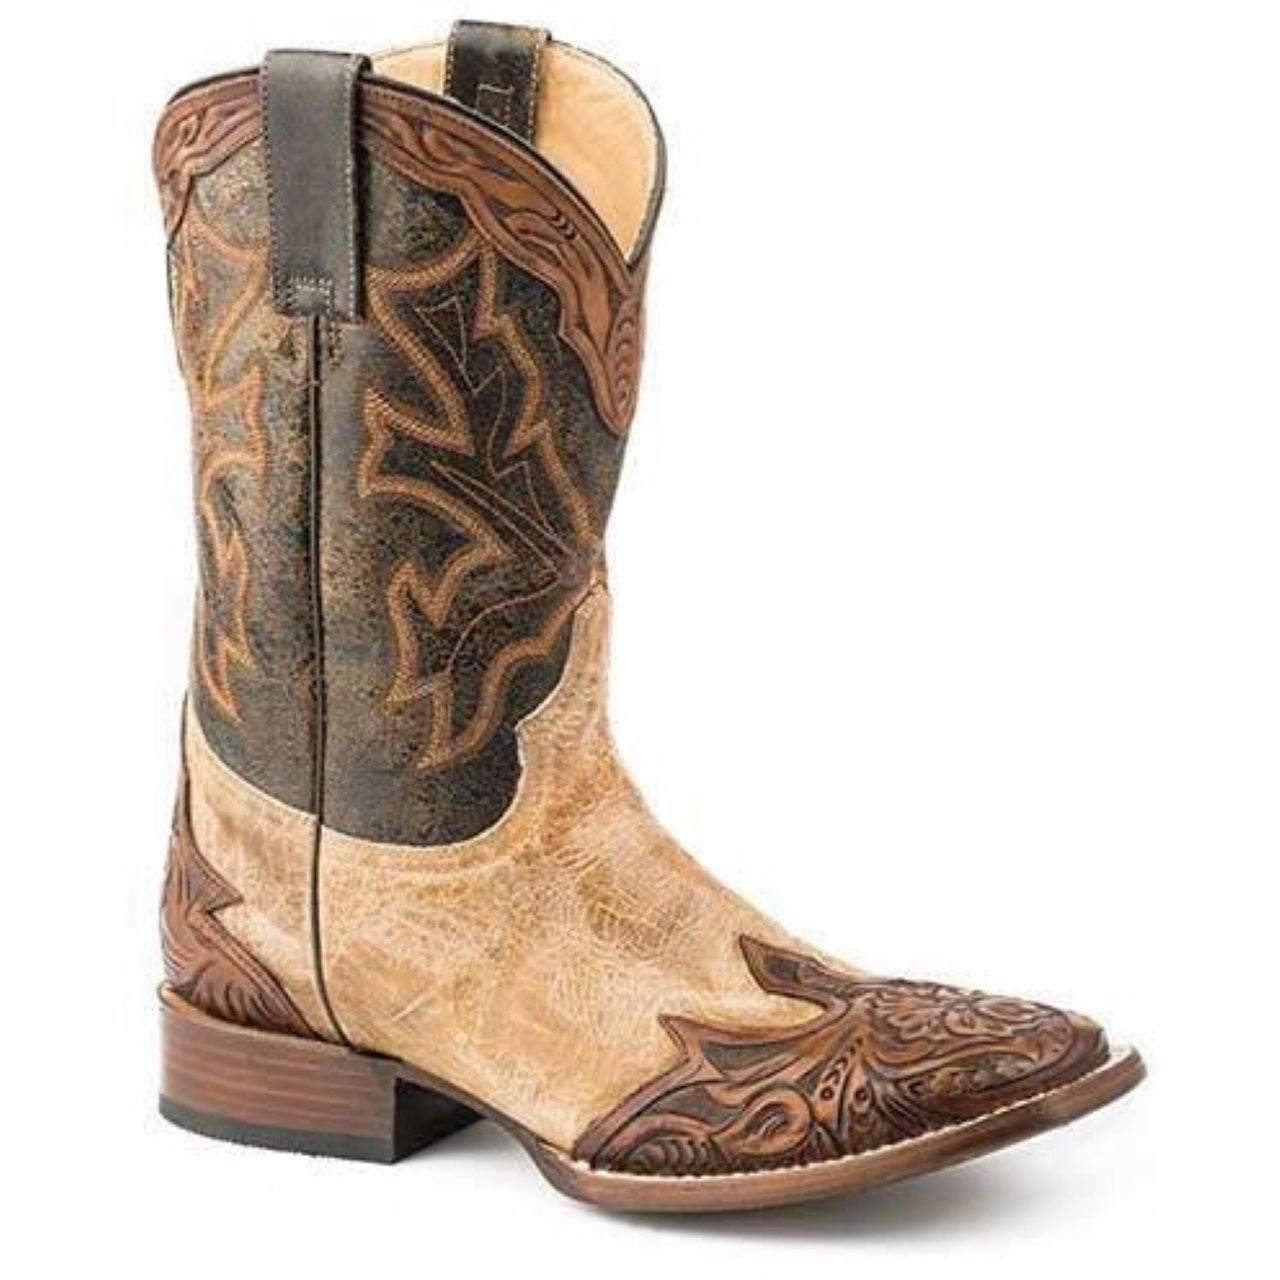 Men's Stetson Julian Hand Tooled Leather Boots Handcrafted Tan - yeehawcowboy